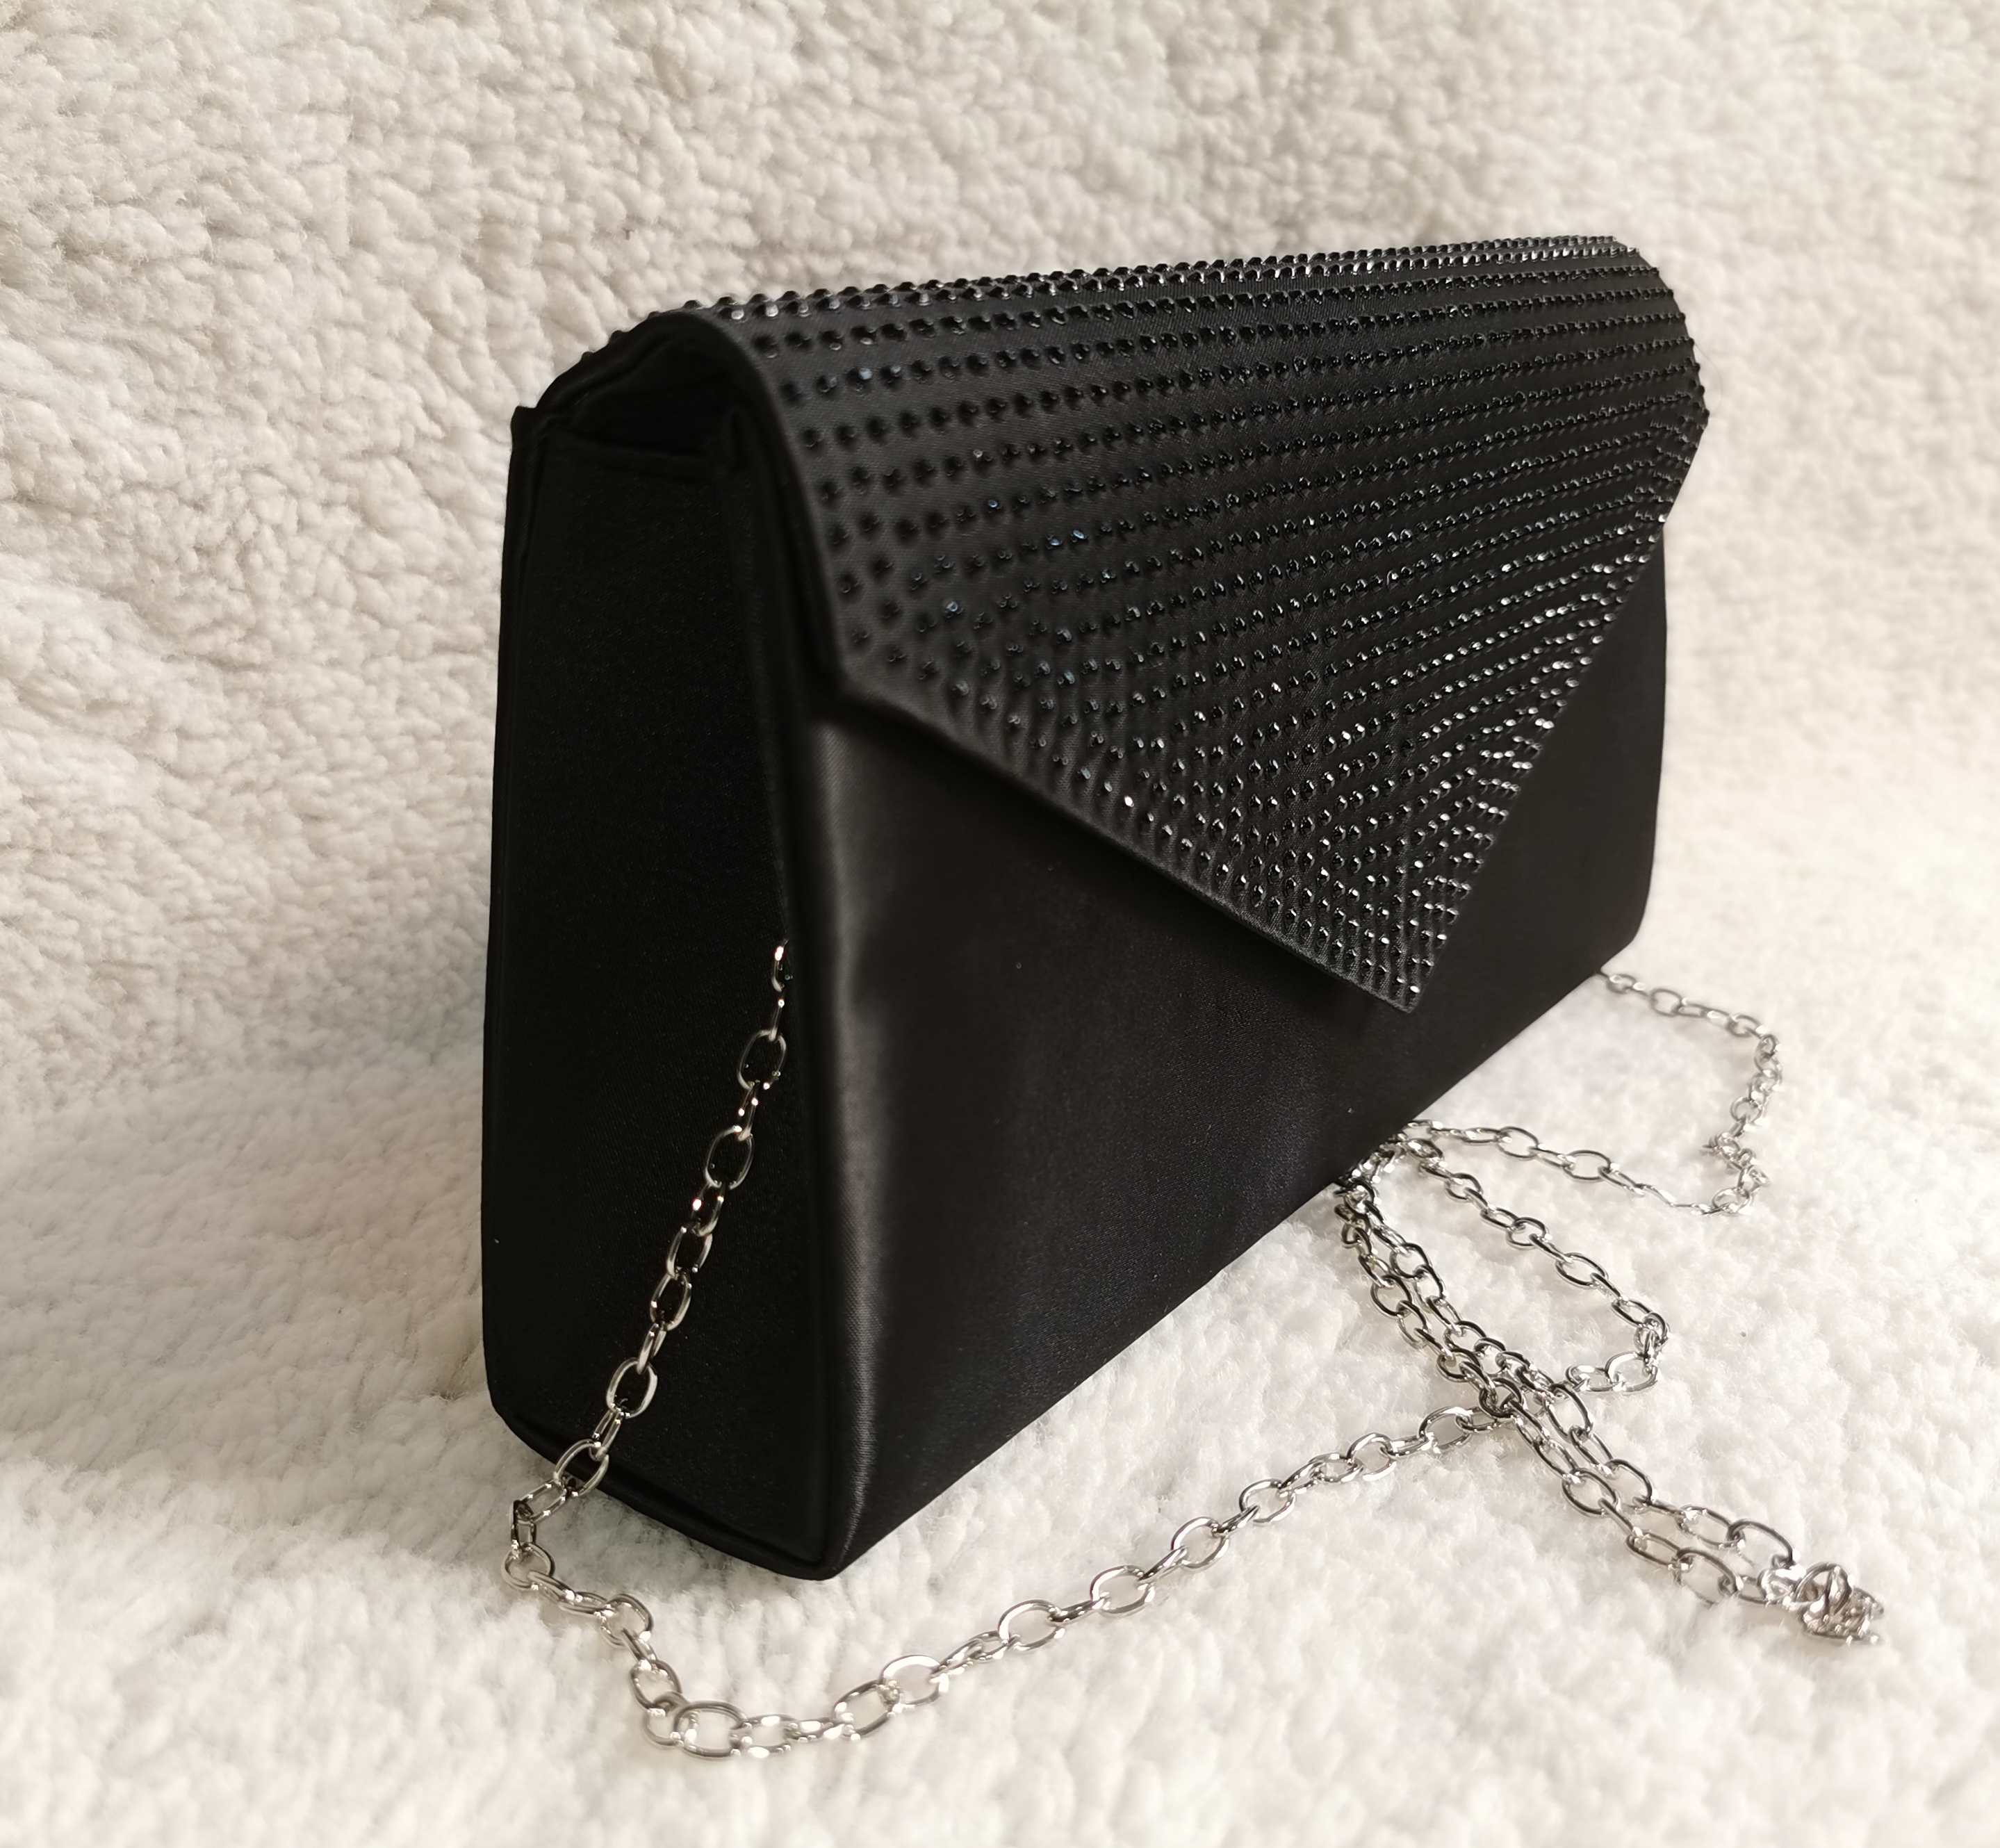 BAG ITALY 22/23 MONOC. ENVELOPE WITH STRASS